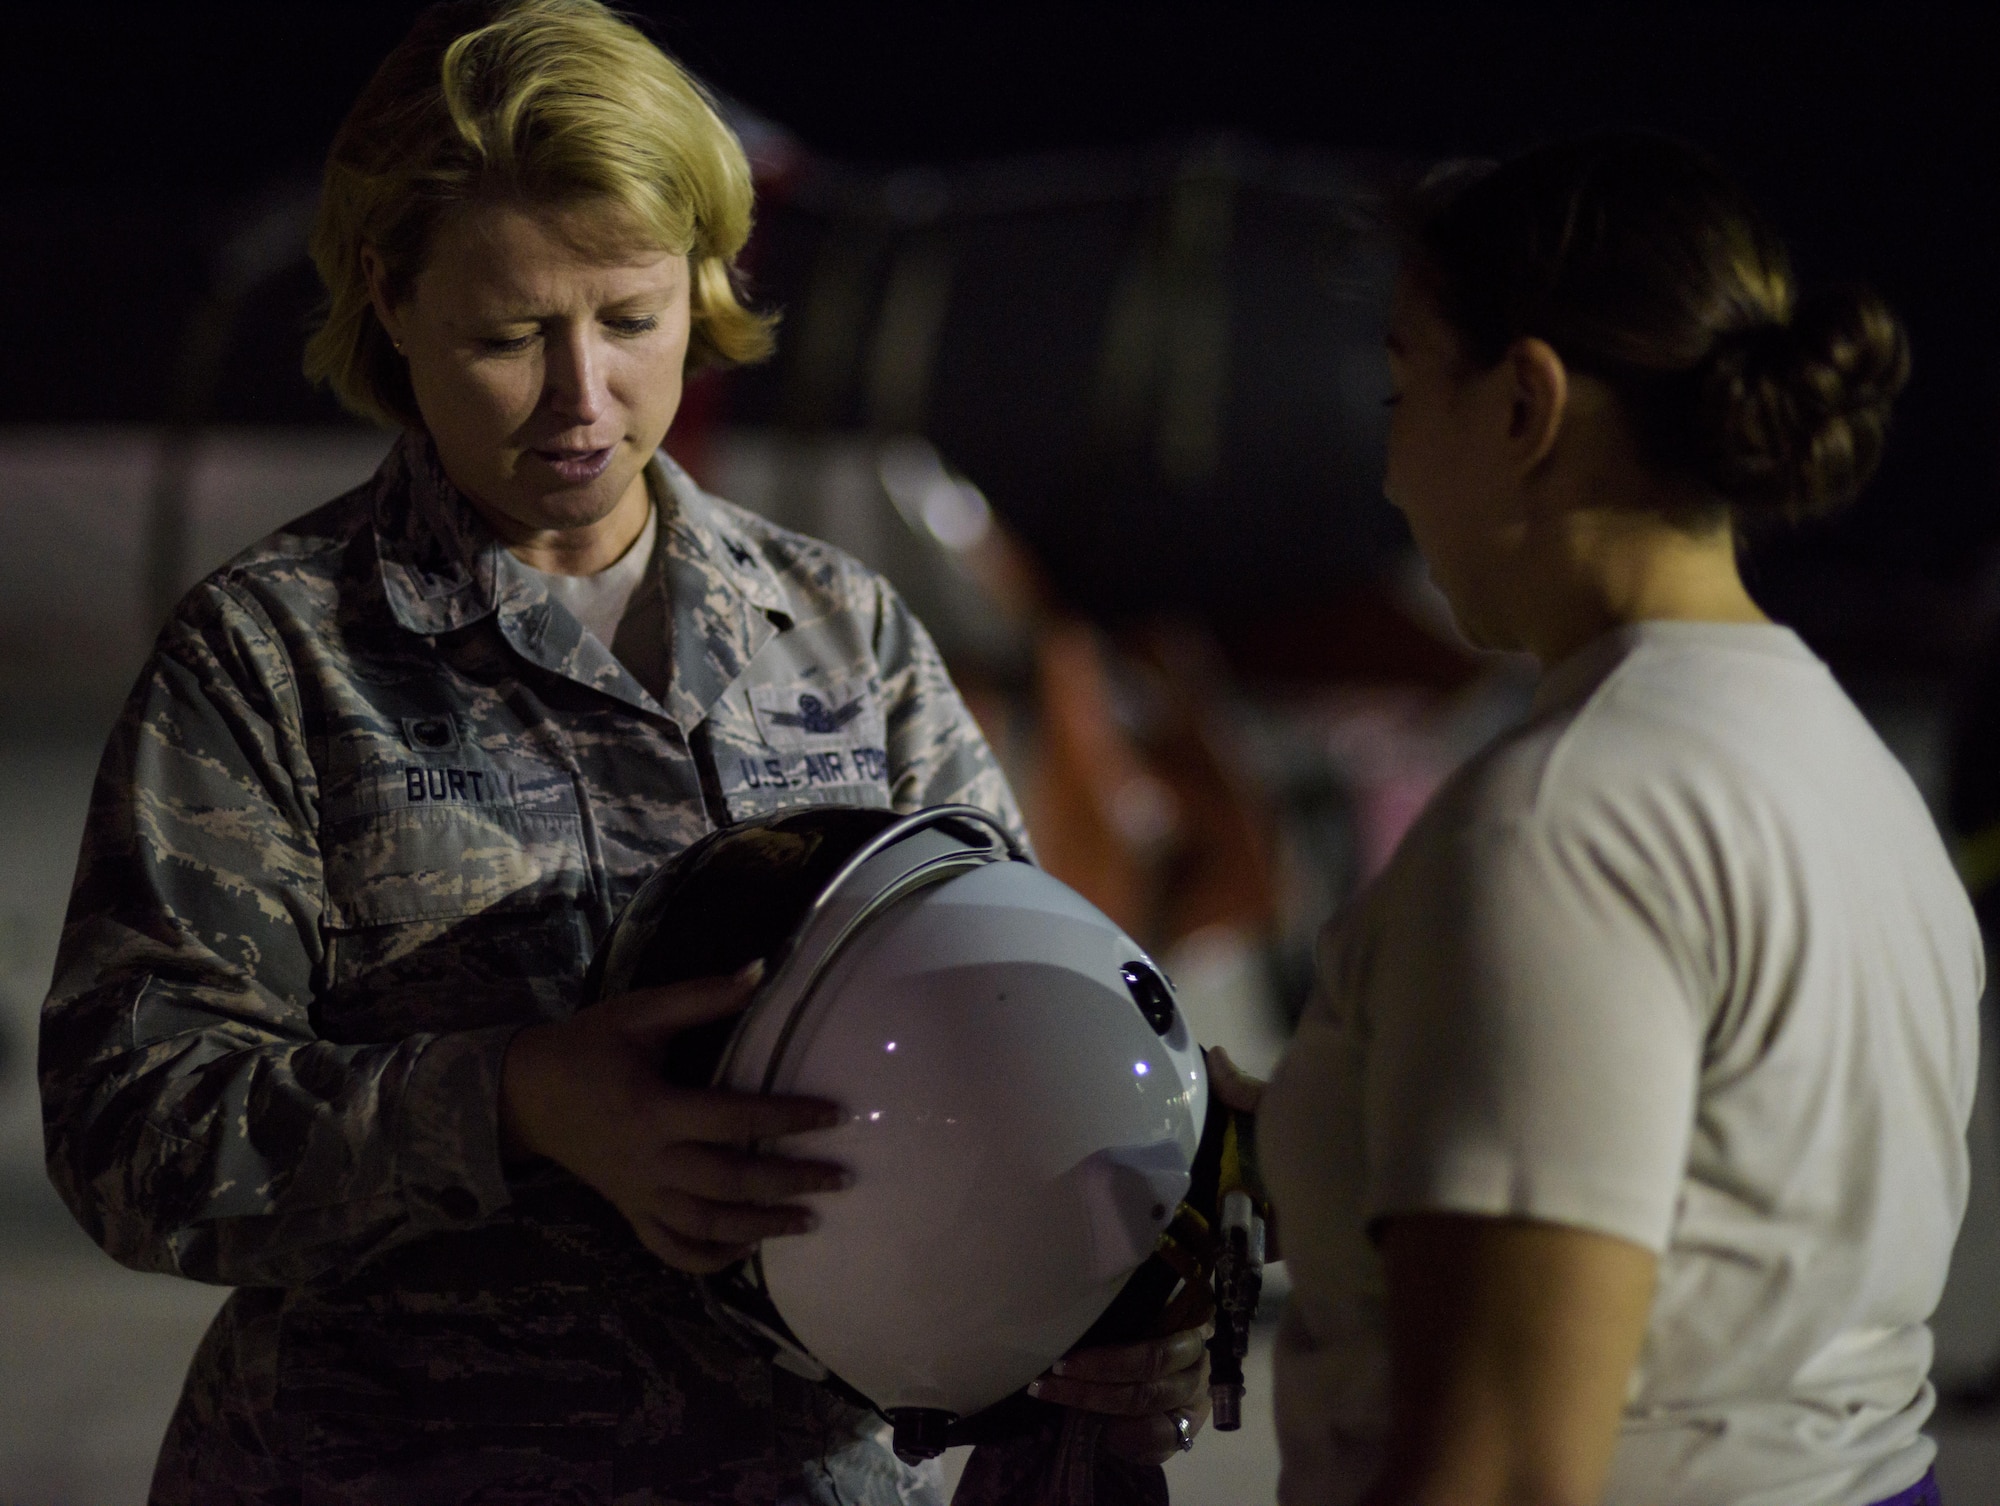 From left, Col. Deanna Burt, the Air Expeditionary Wing commander for exercise Red Flag 16-3 and 50th Space Wing commander, looks over the helmet used minutes ago for a U-2 mission for exercise Red Flag while Staff Sgt. Julie Orellana, 9th Physiology Support Squadron from Beale Air Force Base, Cali., answers questions about the helmet on Nellis Air Force Base, Nevada July 18, 2016.  This is the first time in more than 20 years the U-2 has flown in Red Flag while staging out of Nellis Air Force Base. Red Flag 16-3 incorporates air, space and cyberspace forces. (U.S. Air Force photo/Tech. Sgt. David Salanitri)